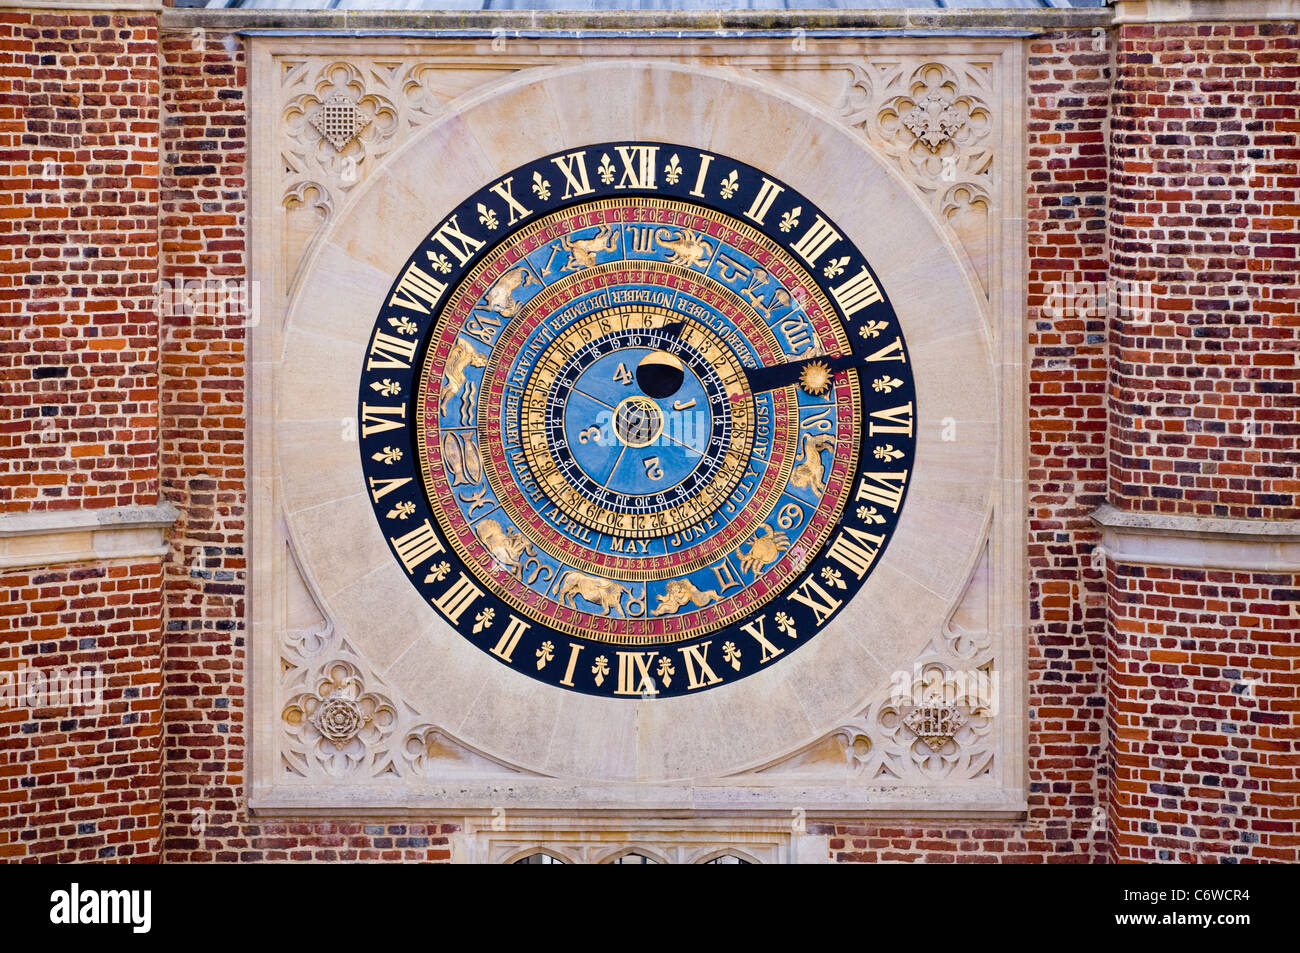 King Henry VIII’s astronomical clock / face which overlooks the Royal Courtyard at Hampton Court Palace. Middlesex. UK. Stock Photo